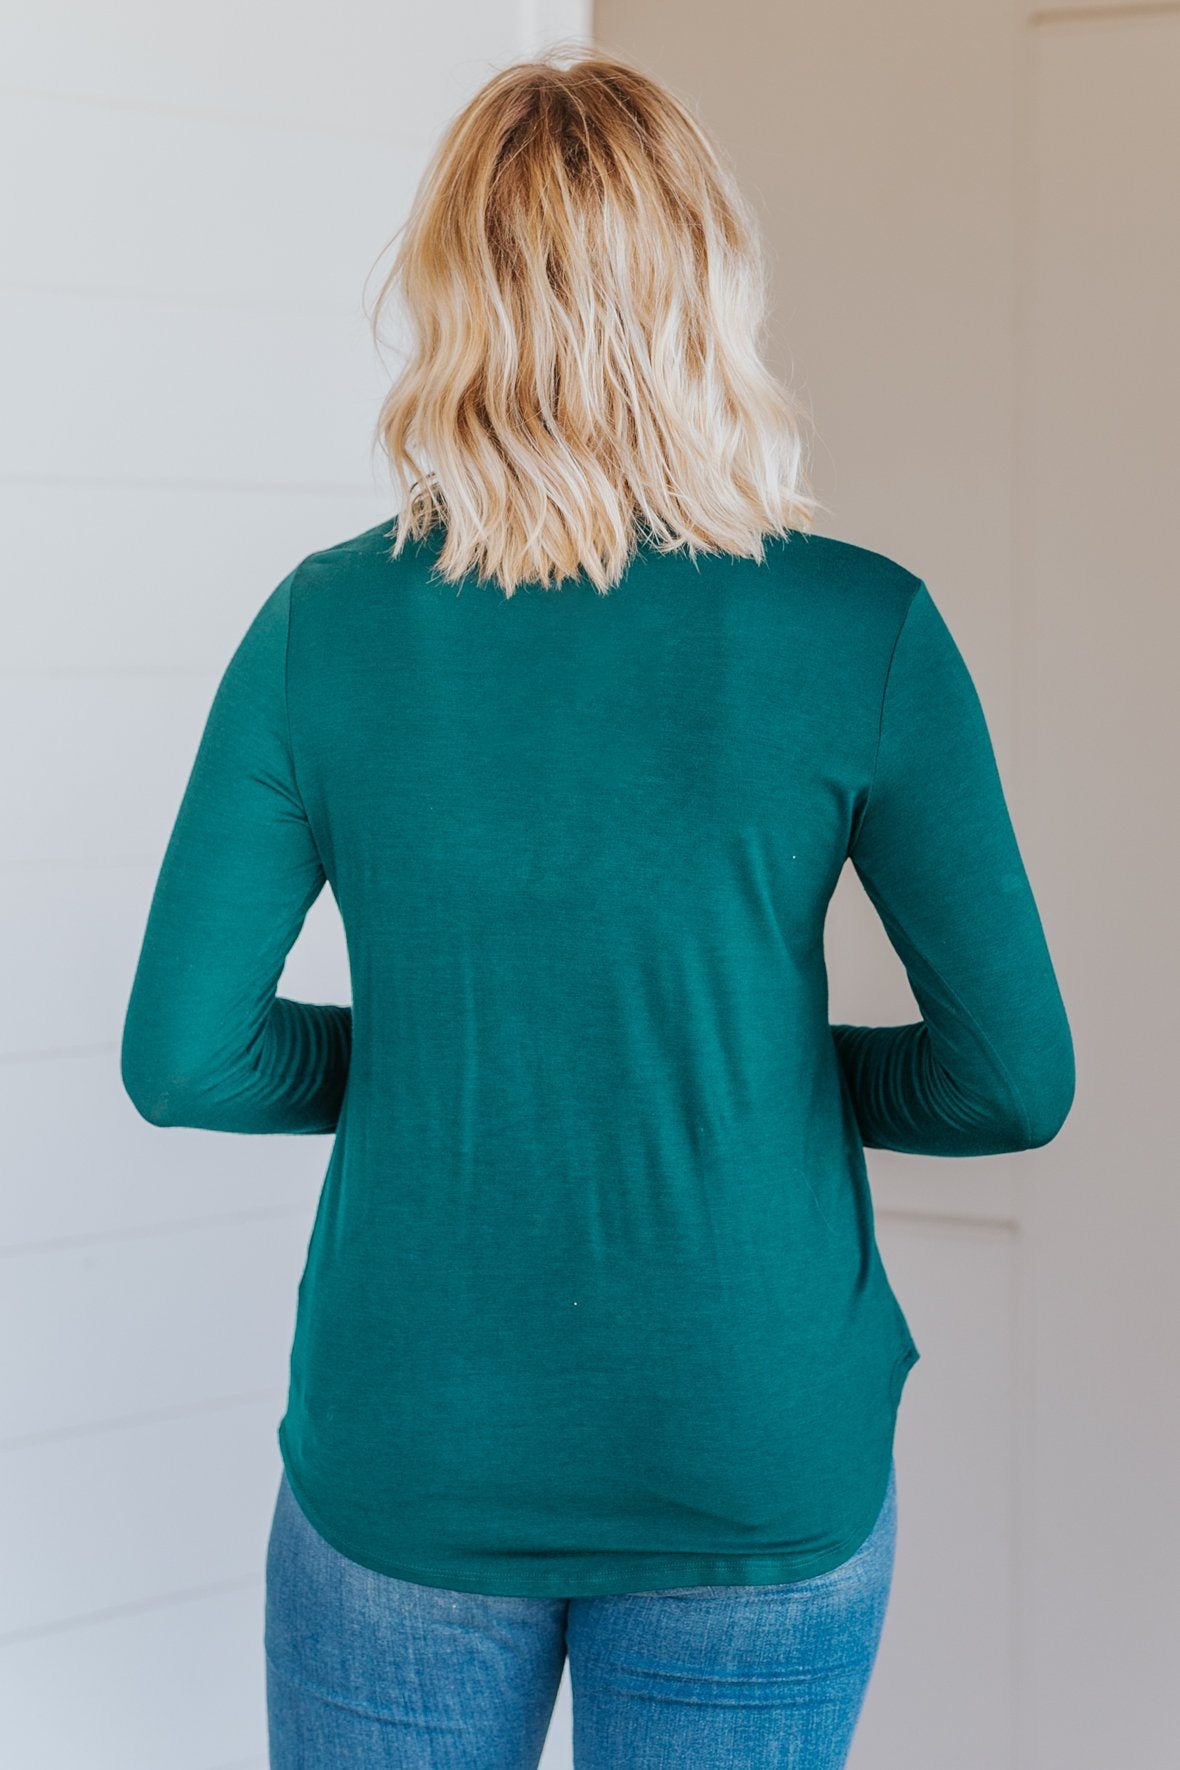 *DEAL* It Is What It Is Button Down Long Sleeve Top in Hunter Green - Filly Flair